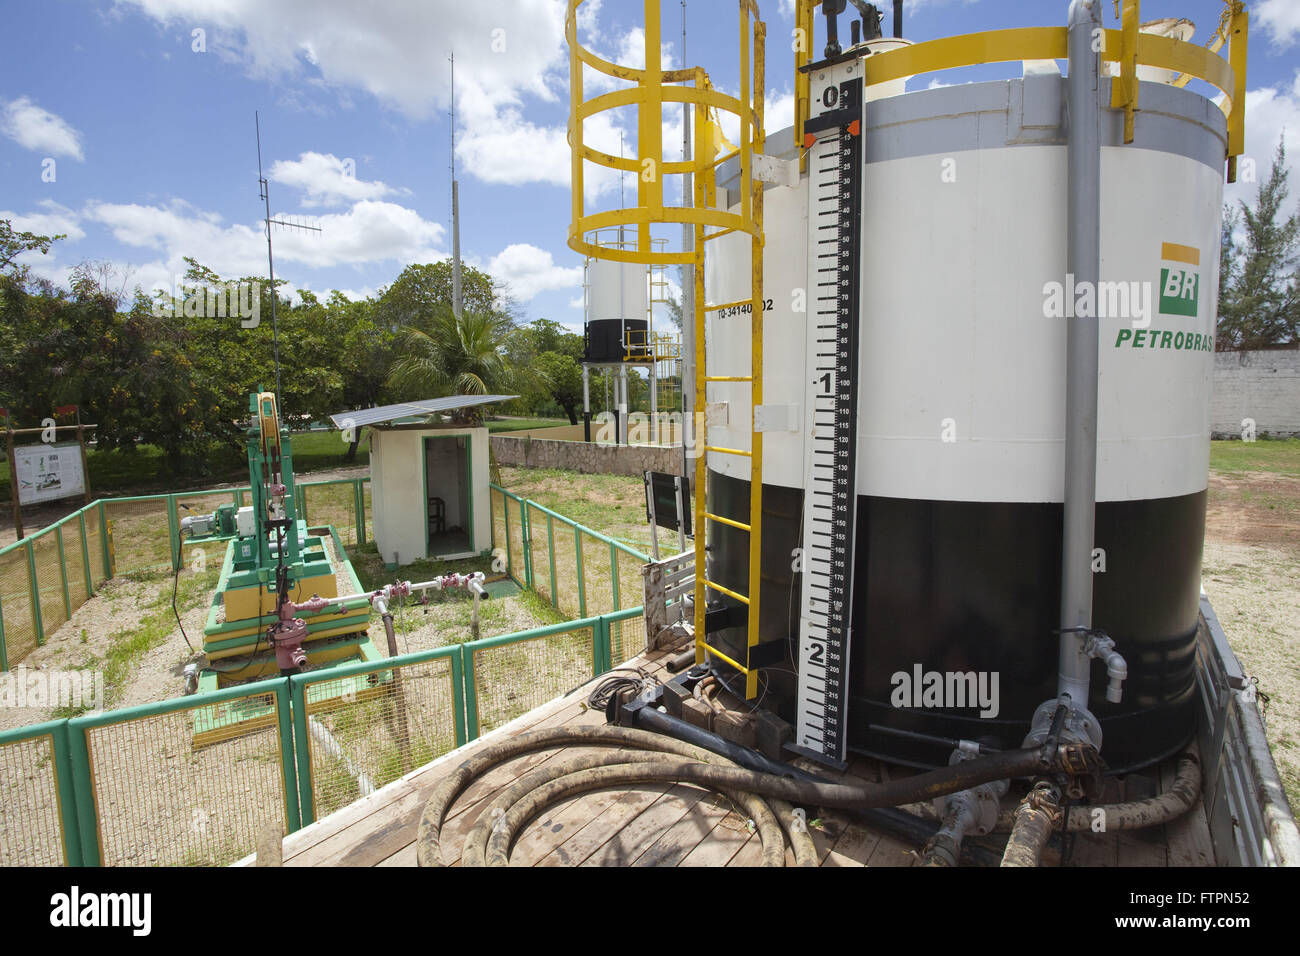 Each of the first poco pumping oil producer in the region of Mossoro Stock Photo